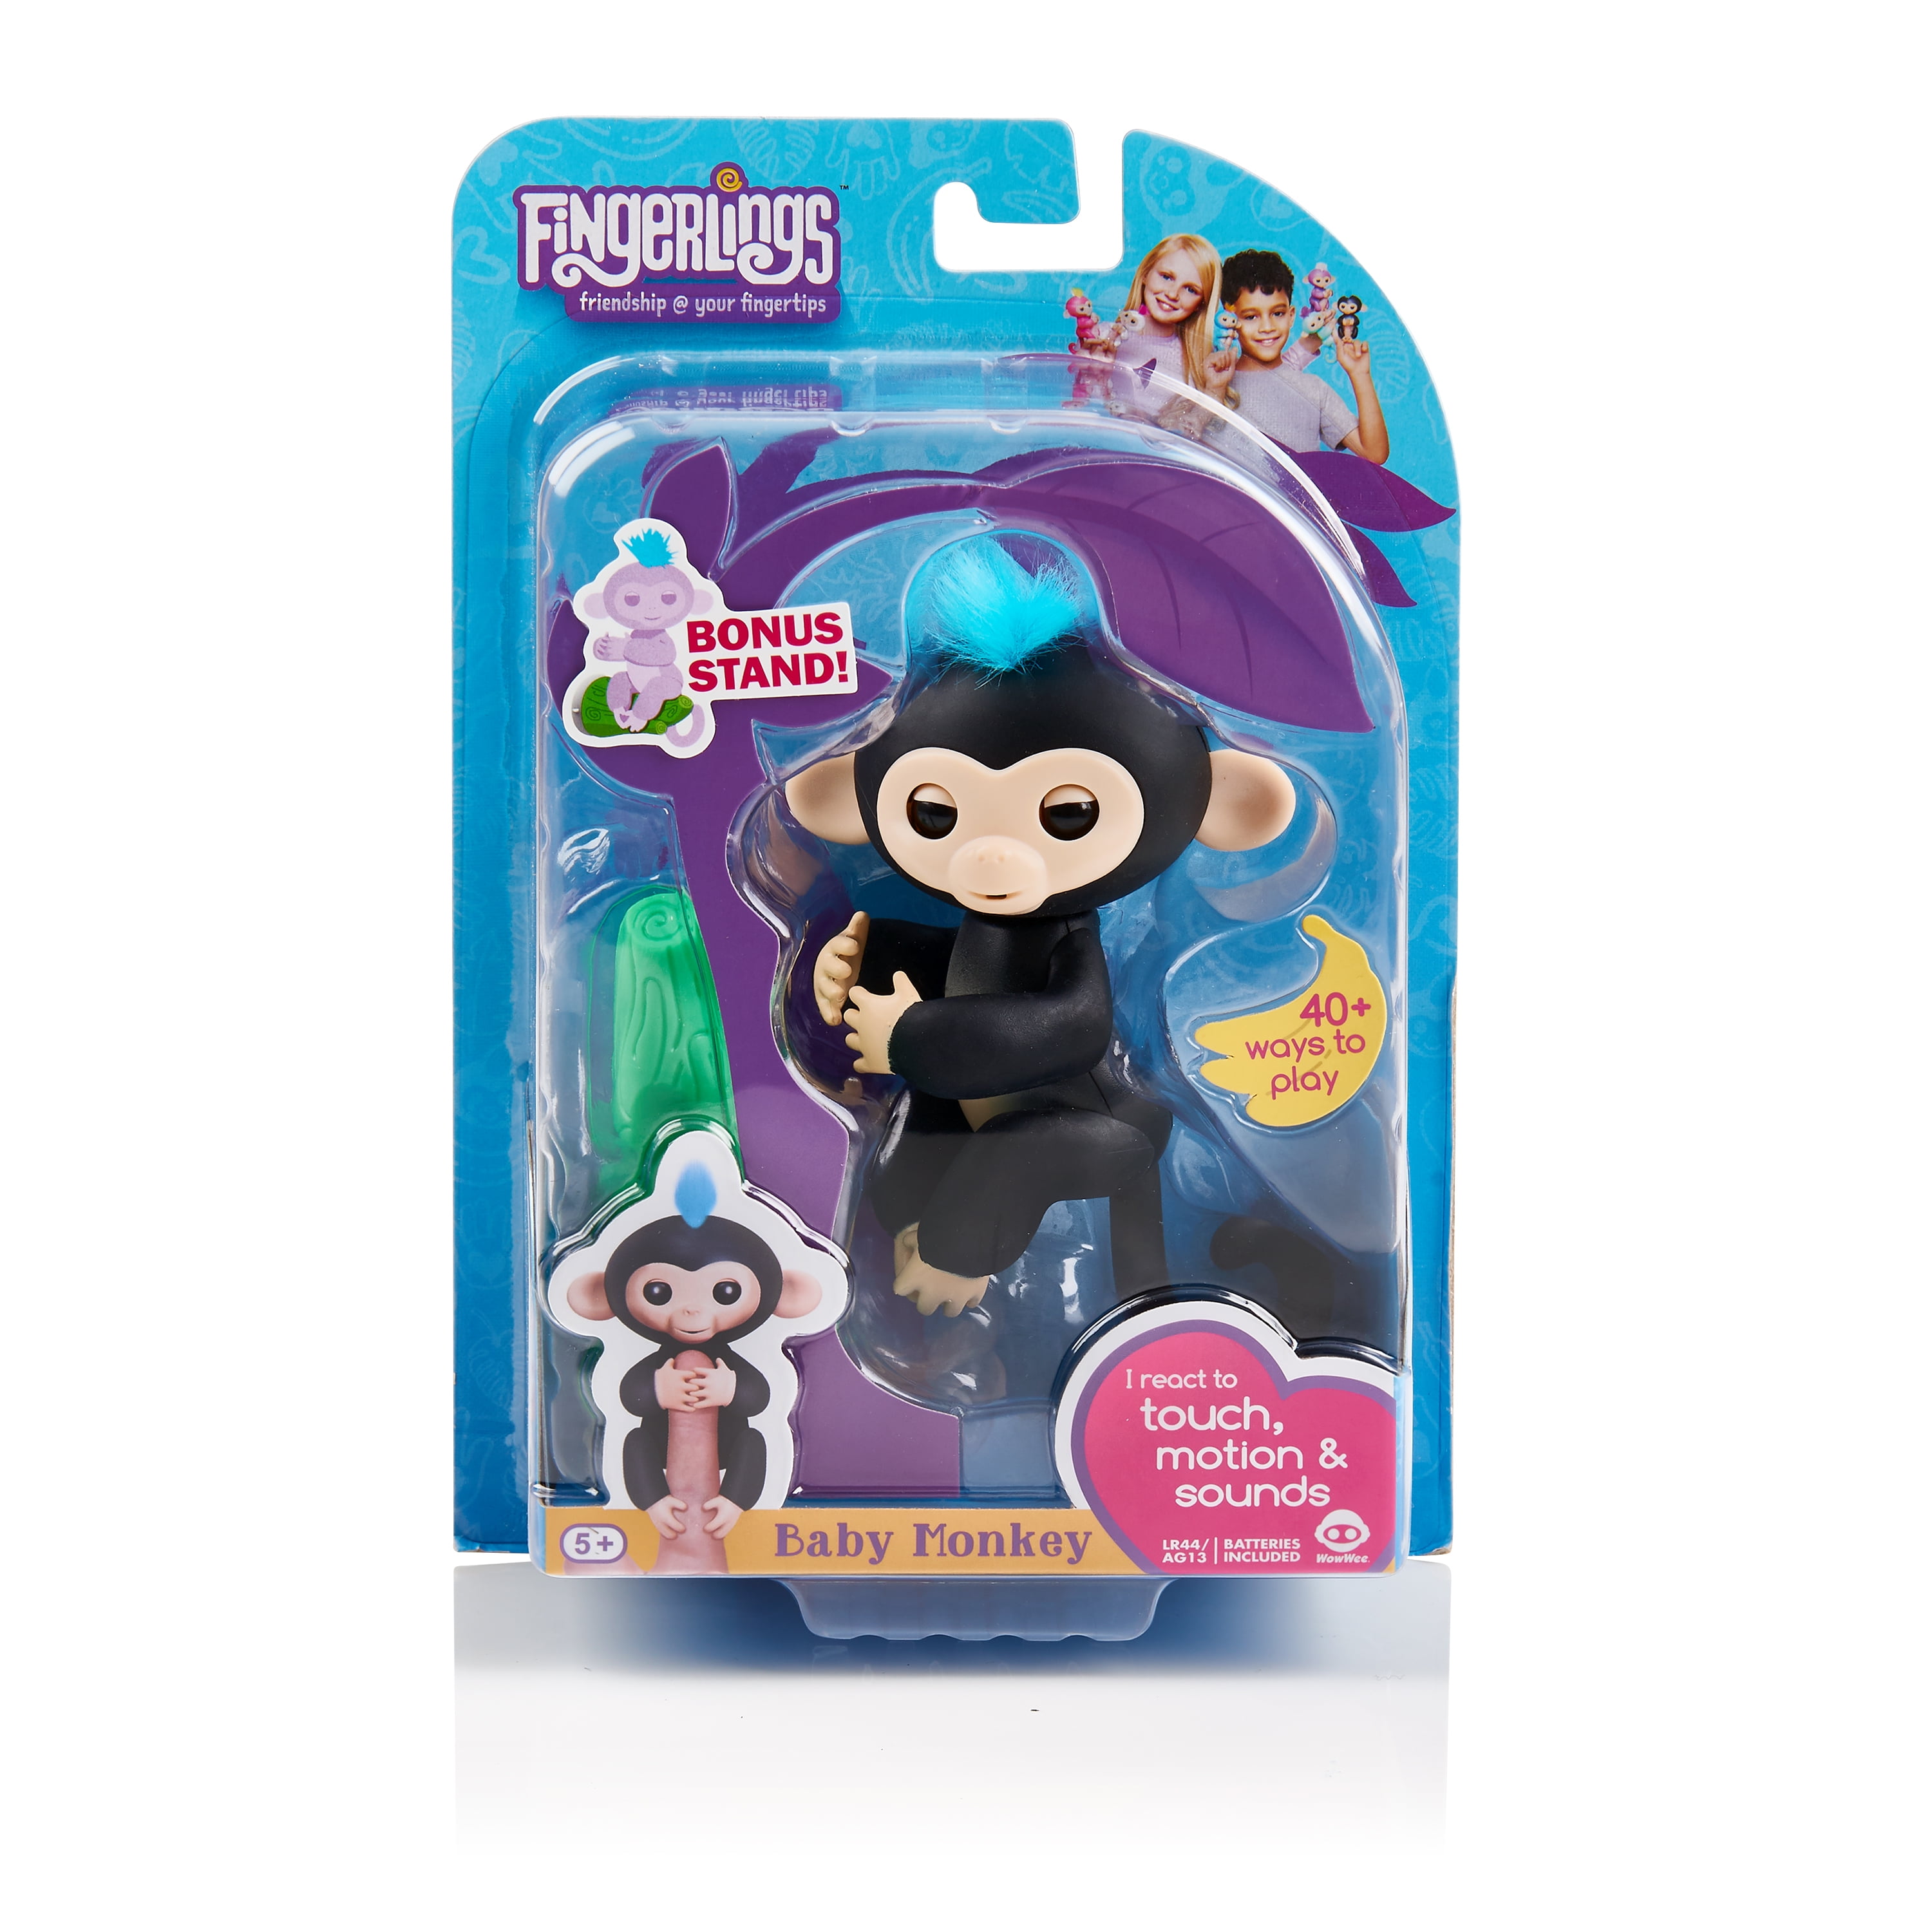 Wow Wee Electronic Toy Omaky Fingerlings Interactive Baby Monkey 